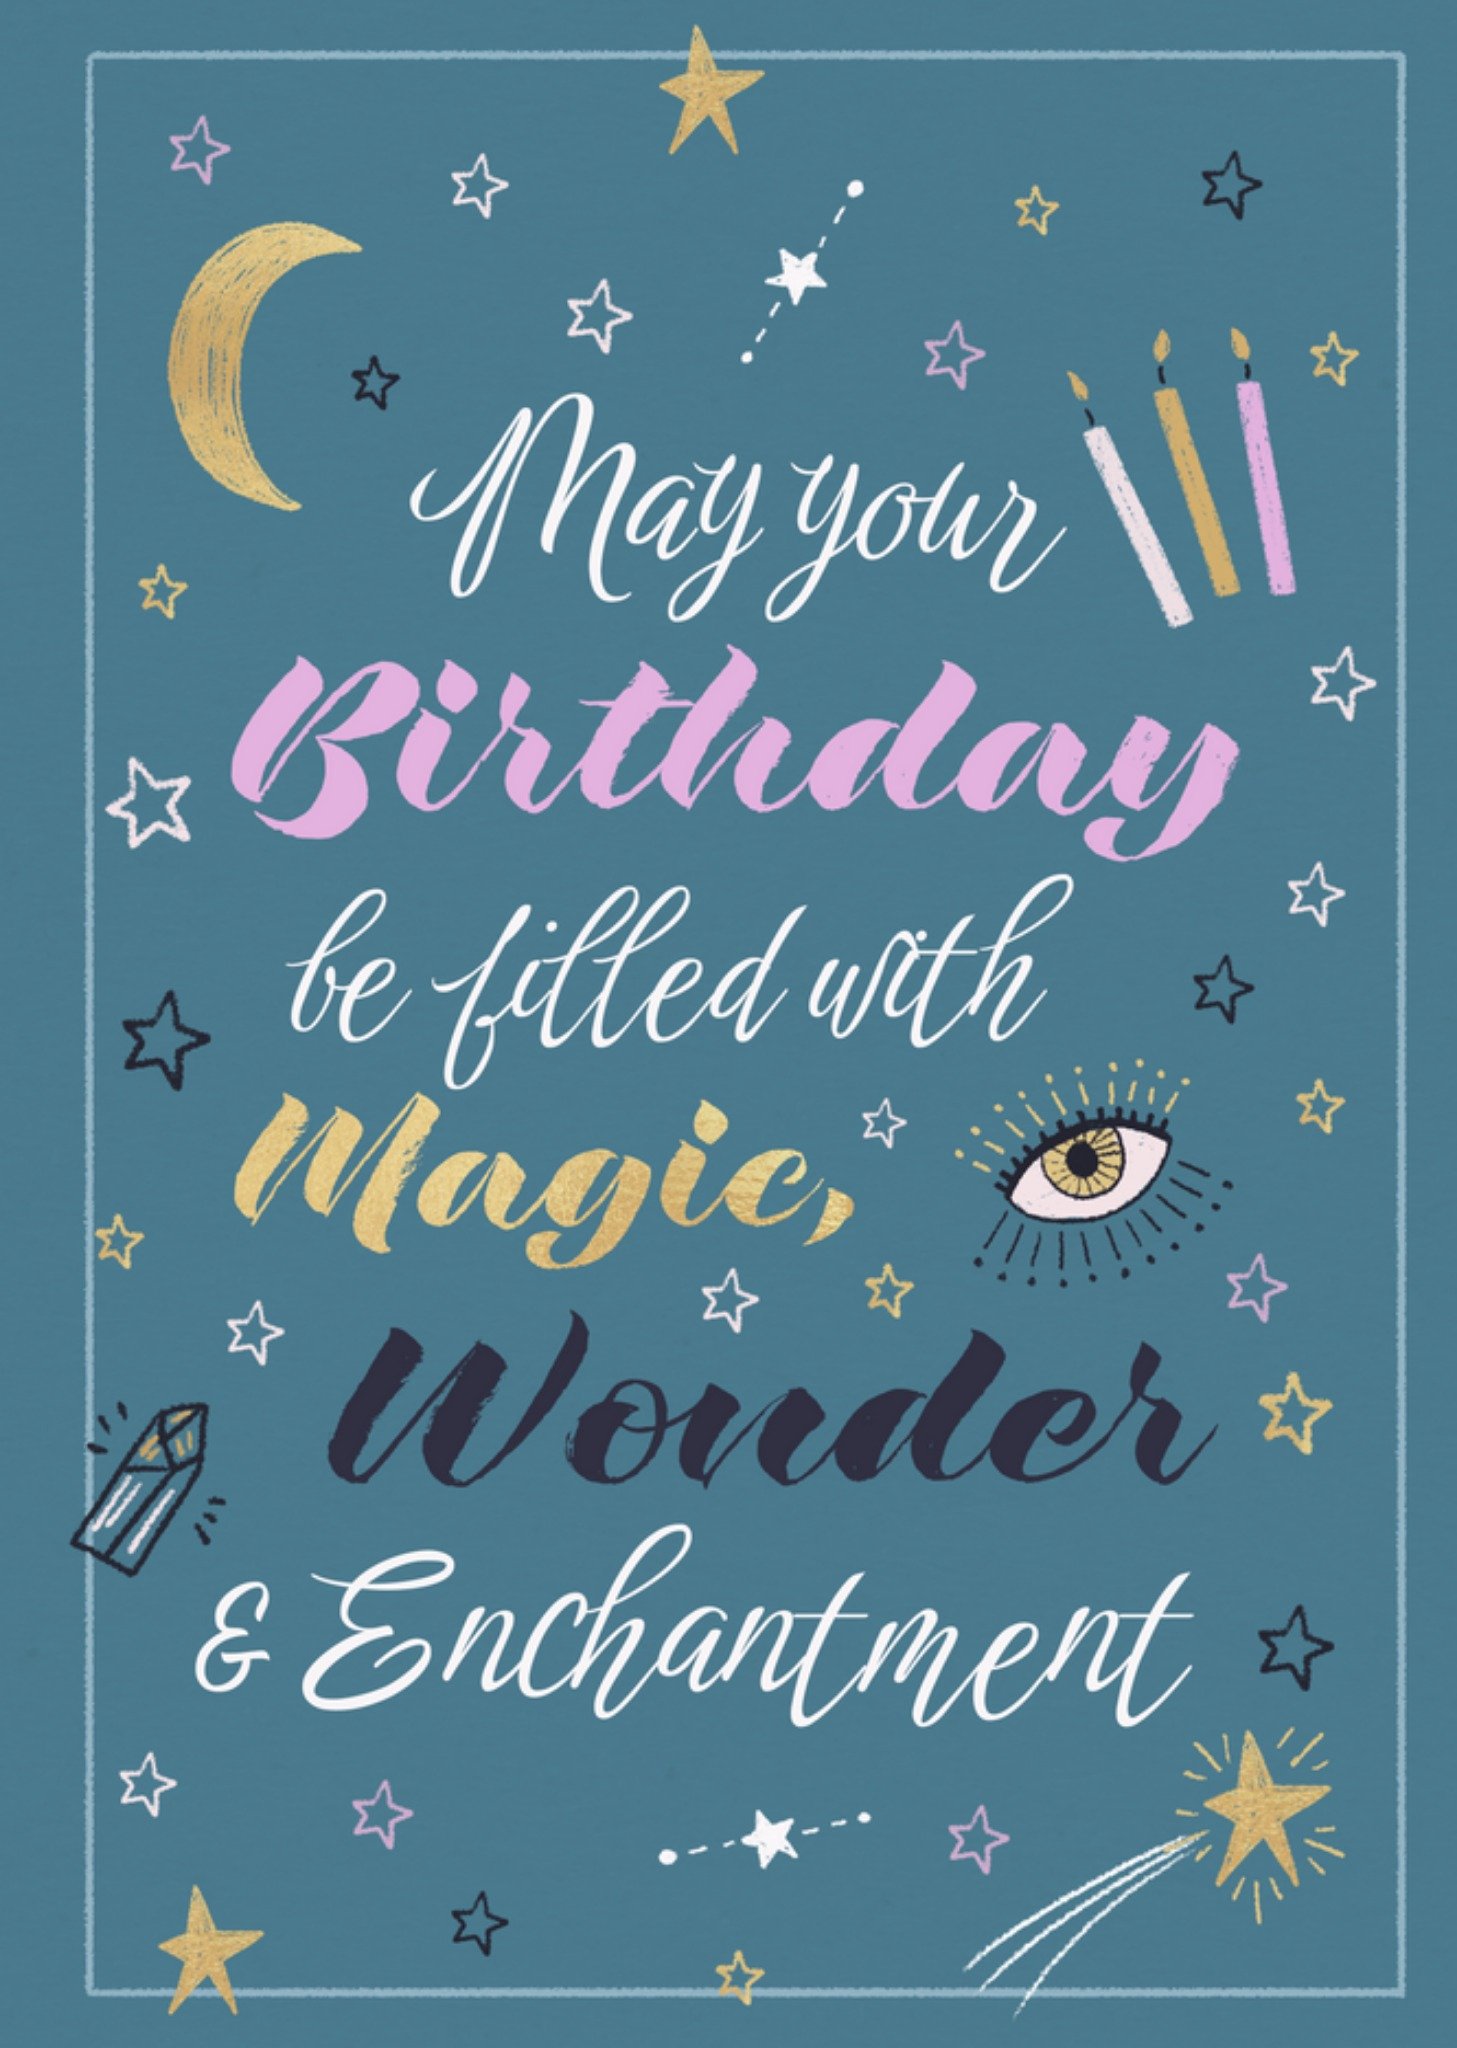 Friends Mystical Magic Wonder And Enchantment Illustrated Calligraphy Birthday Card, Large